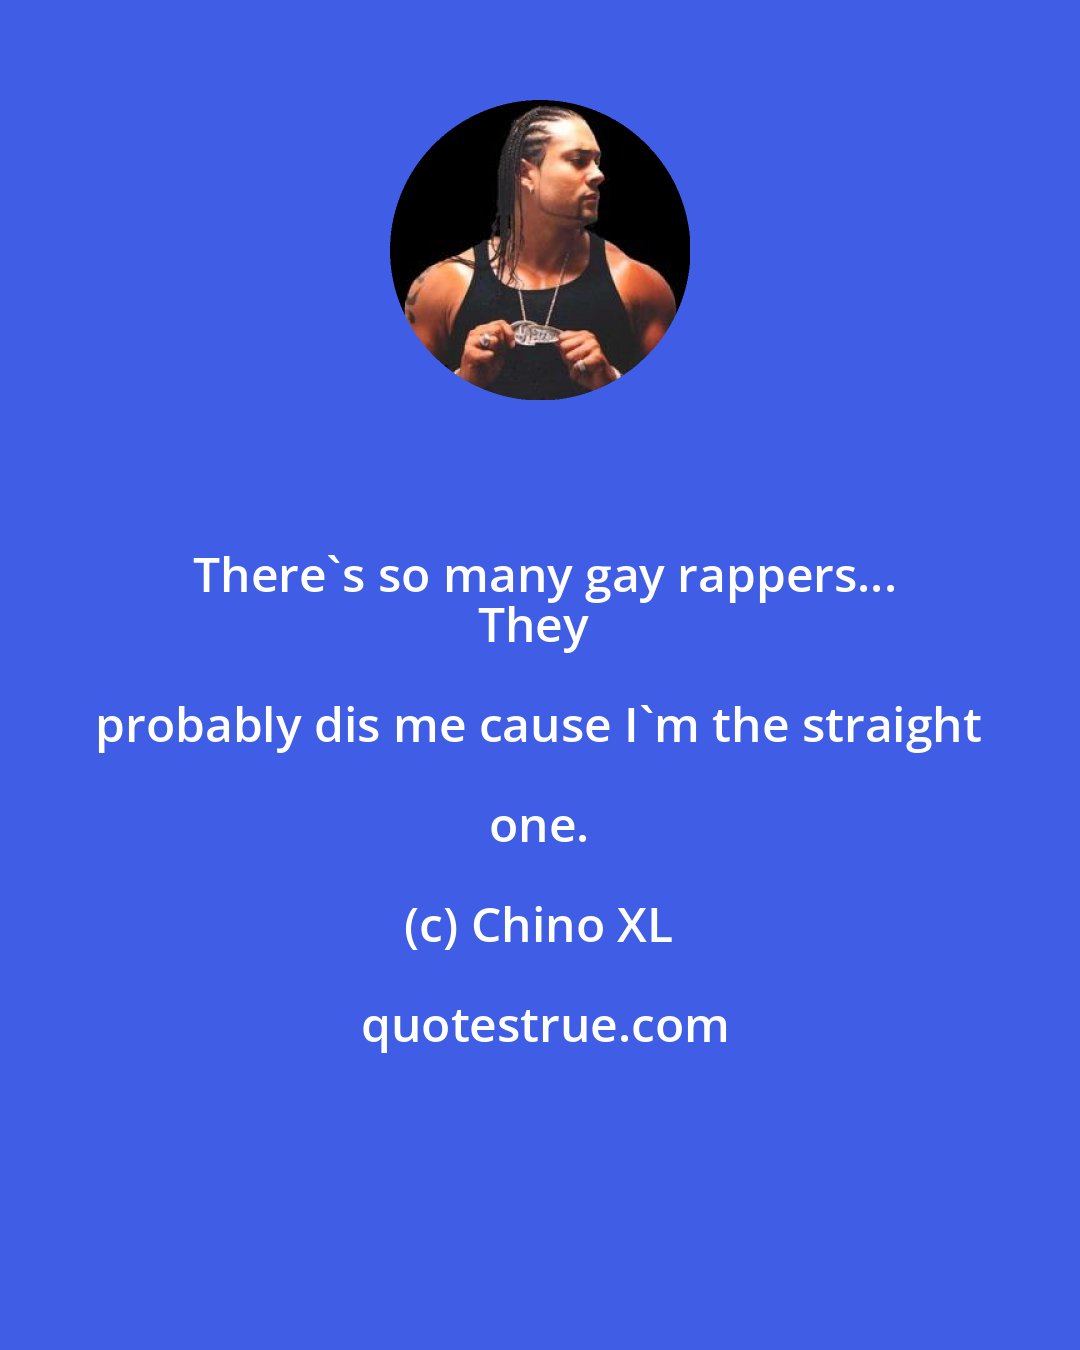 Chino XL: There's so many gay rappers...
They probably dis me cause I'm the straight one.